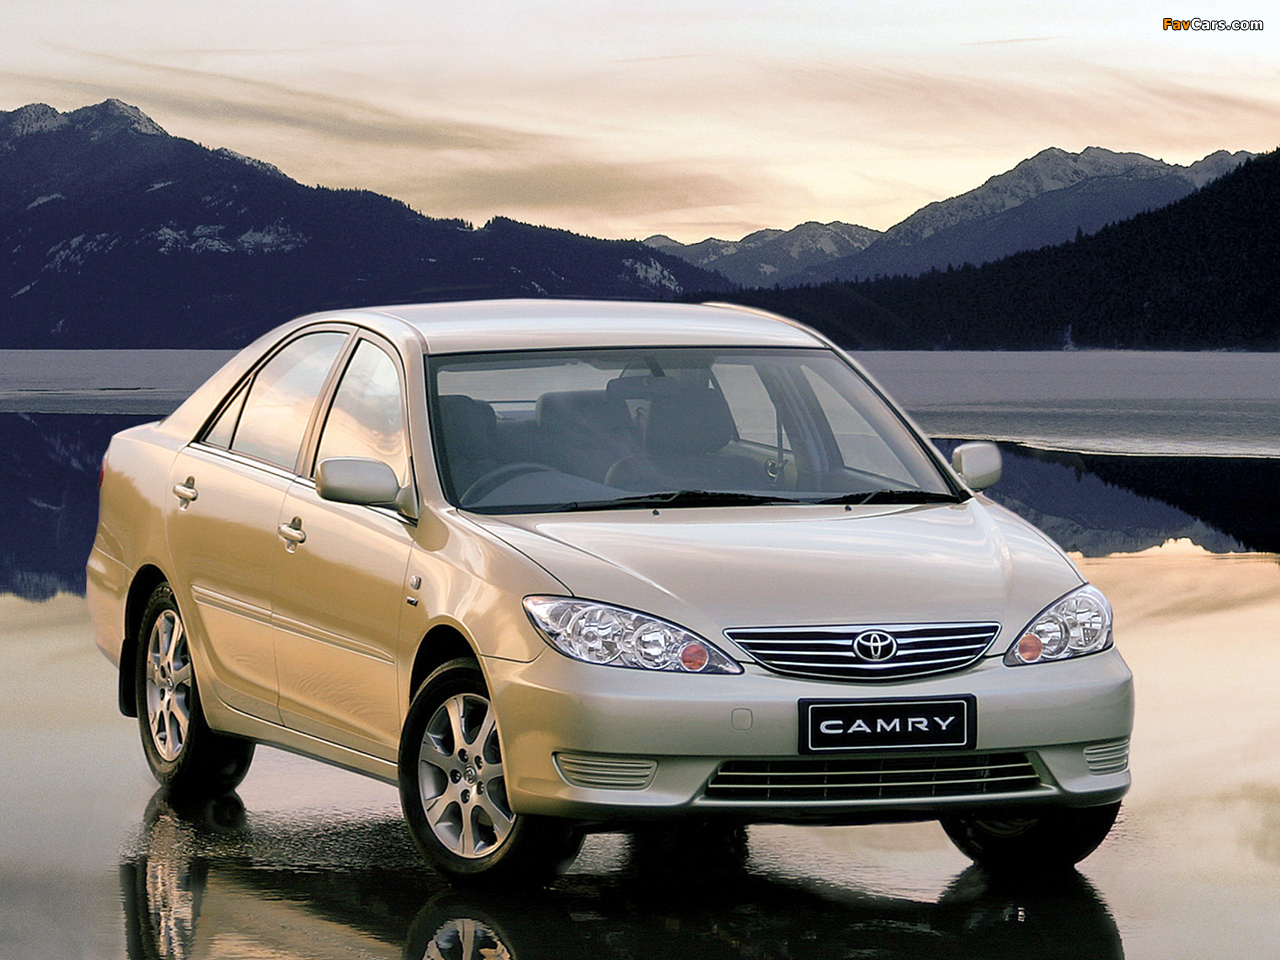 Toyota Camry ZA-spec (ACV30) 2004-06 images (1280x960)